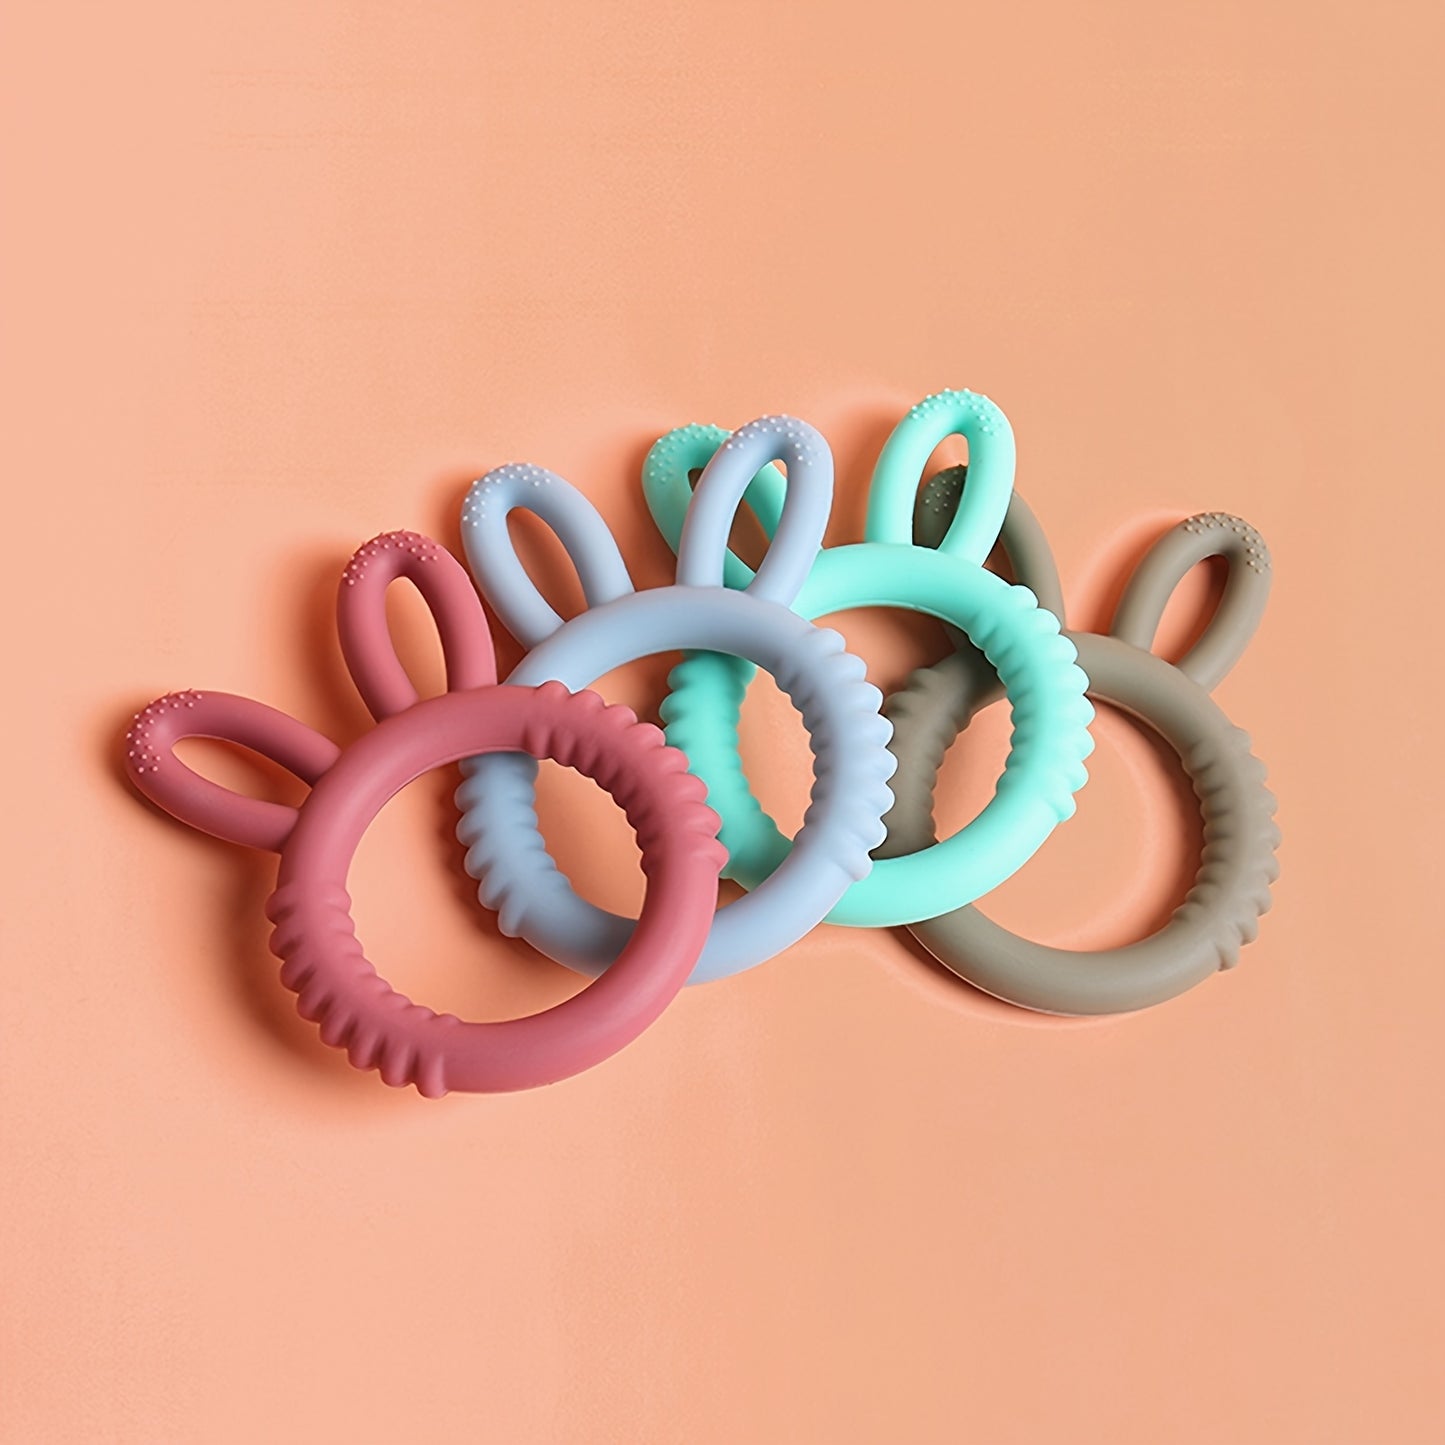 Baby Silicone Teether 2022 New Product Rabbit Ears Chewing Gum Molar Stick Baby Teething Toy Bracelet